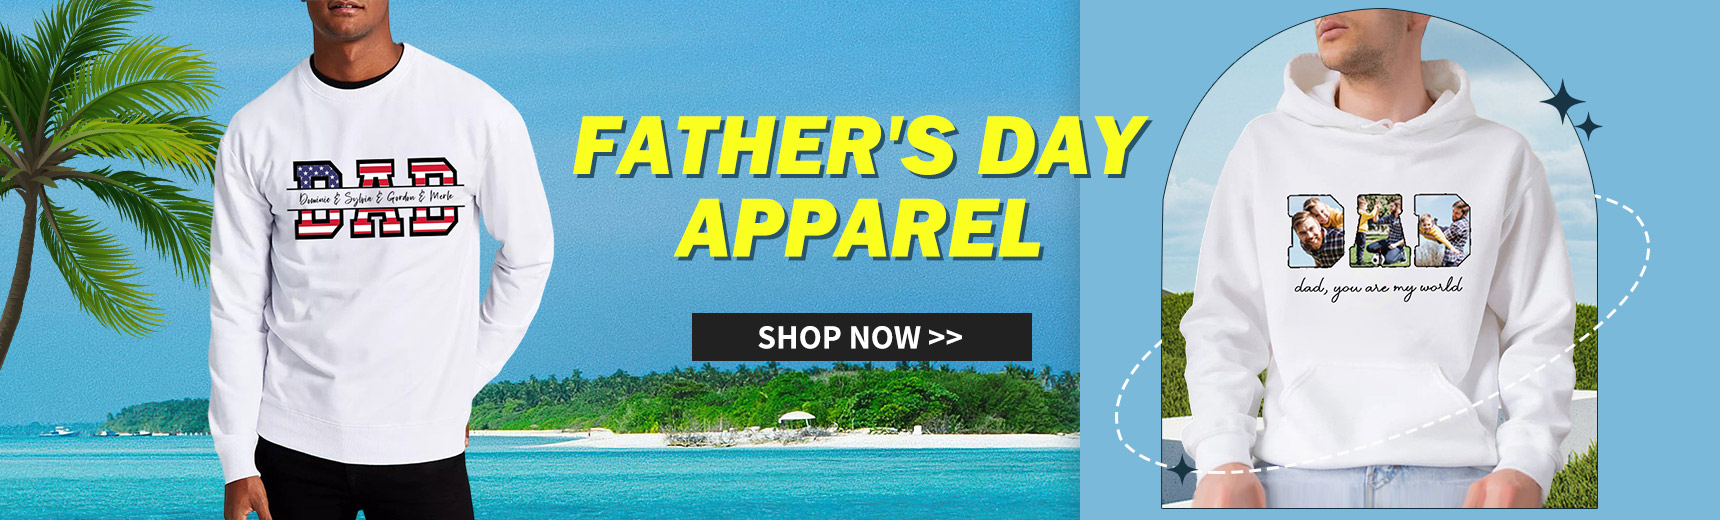 FATHER'S DAY APPAREL